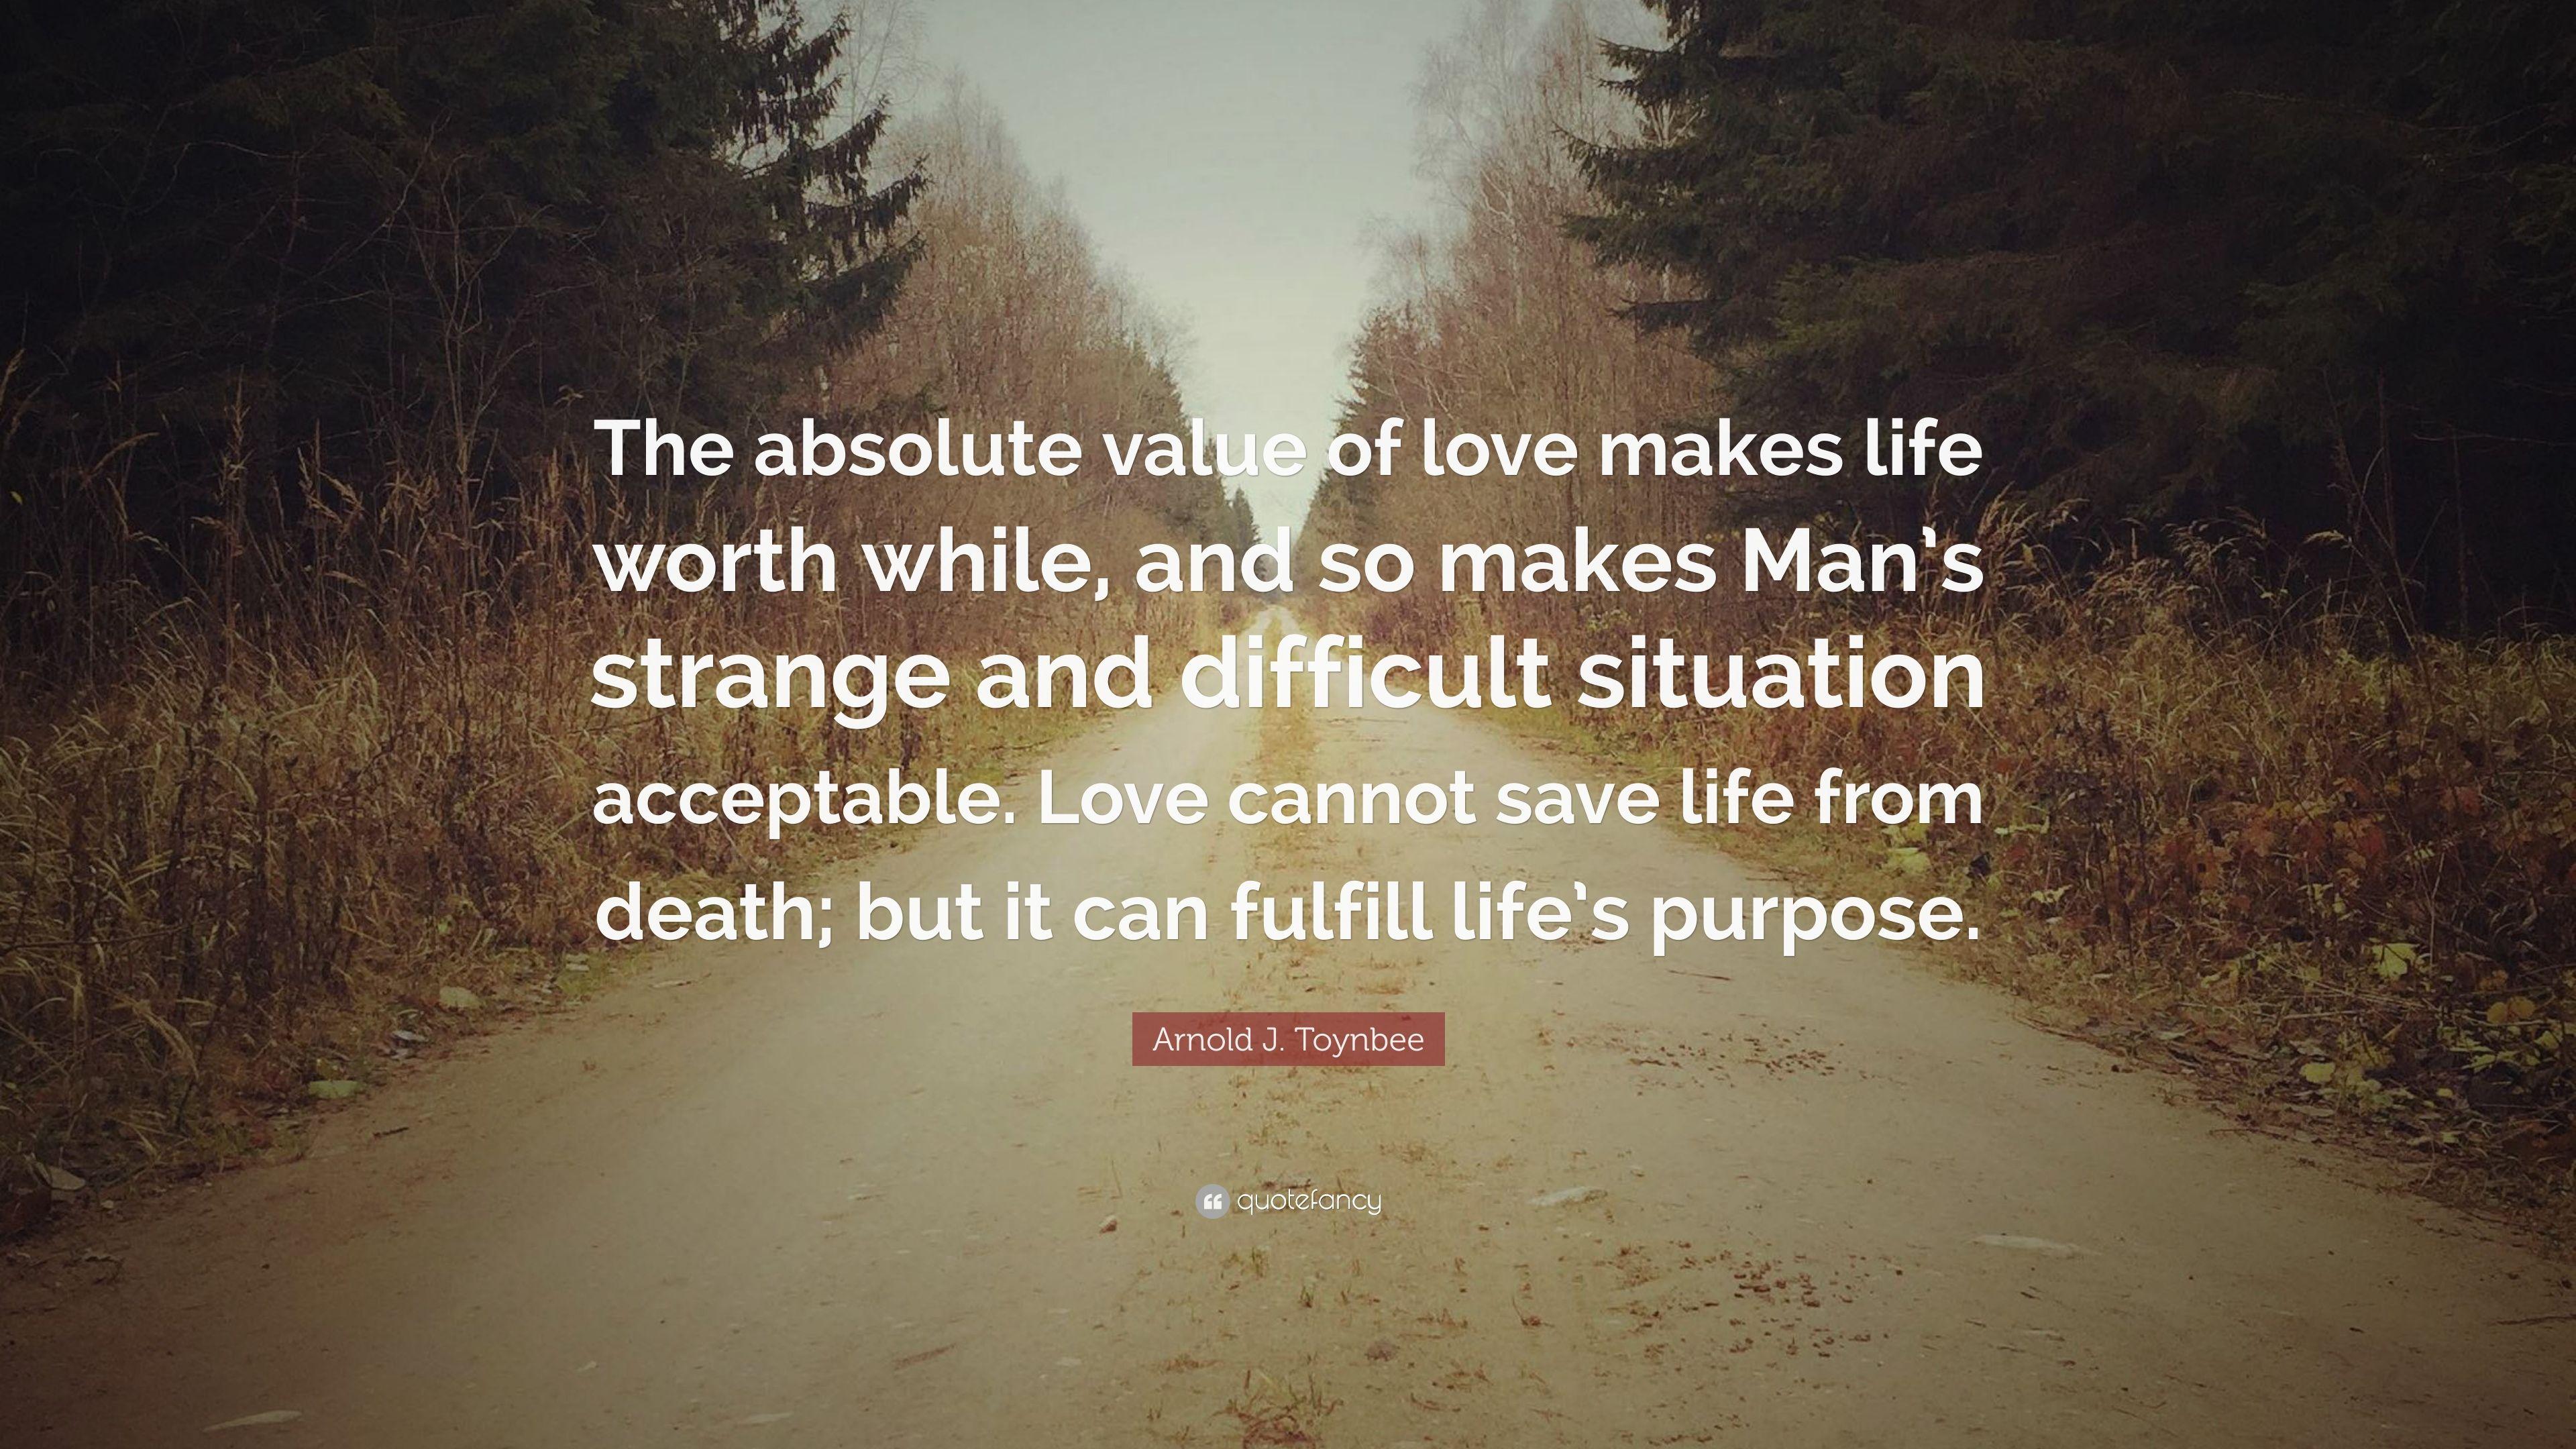 Arnold J. Toynbee Quote: “The absolute value of love makes life